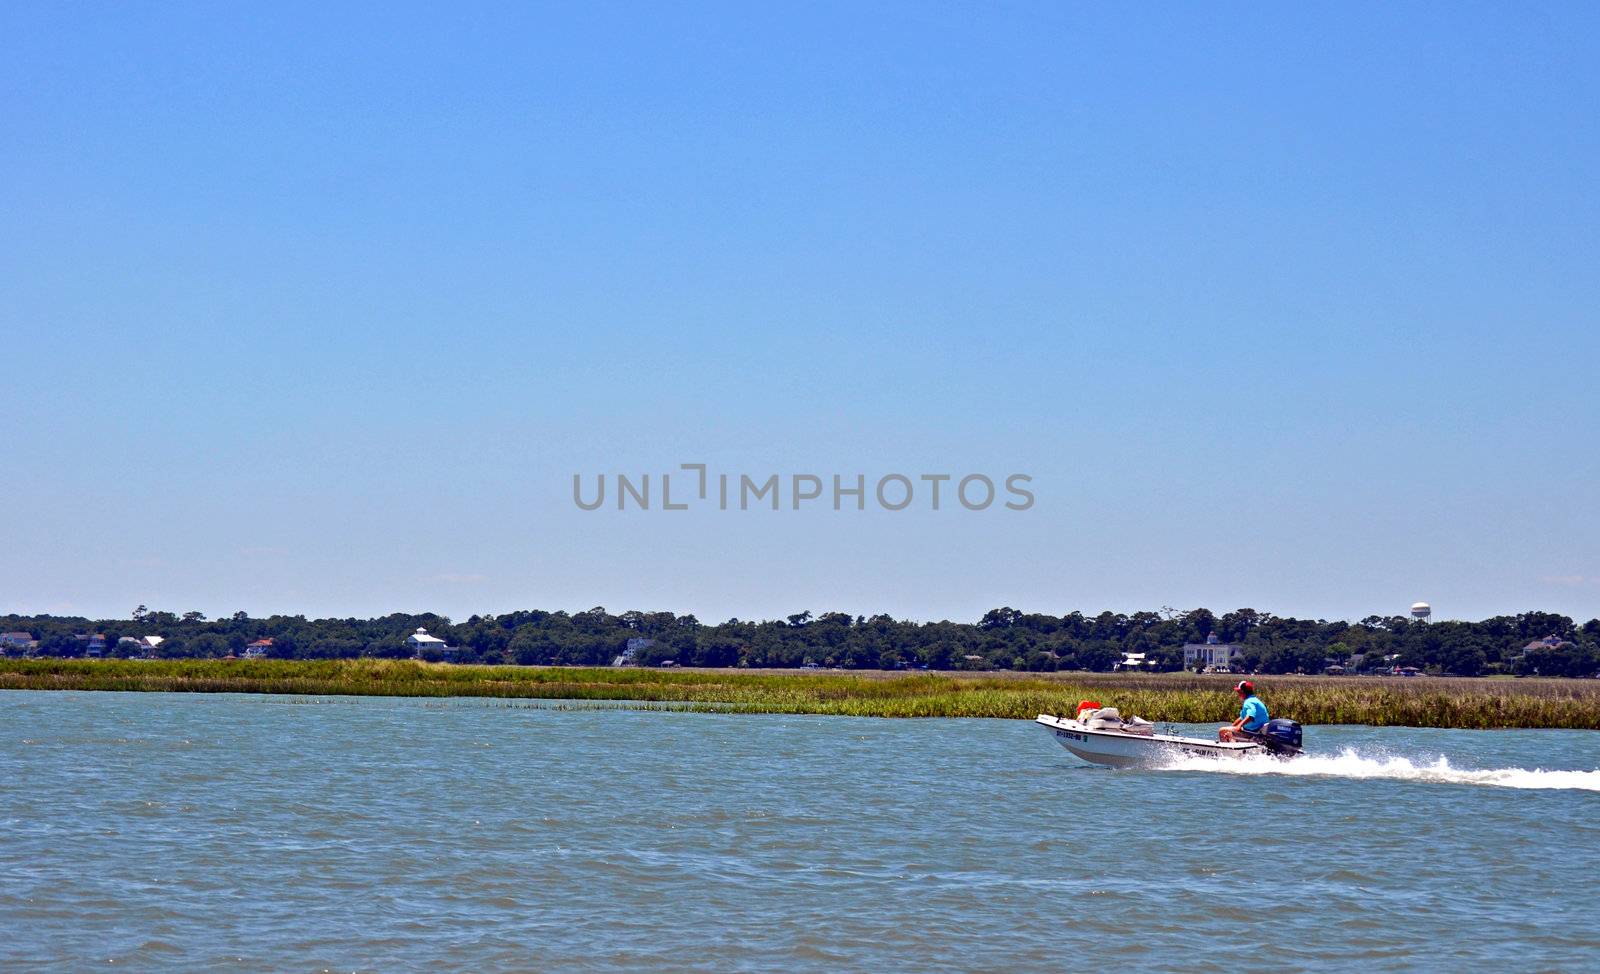 Boating across the water by RefocusPhoto